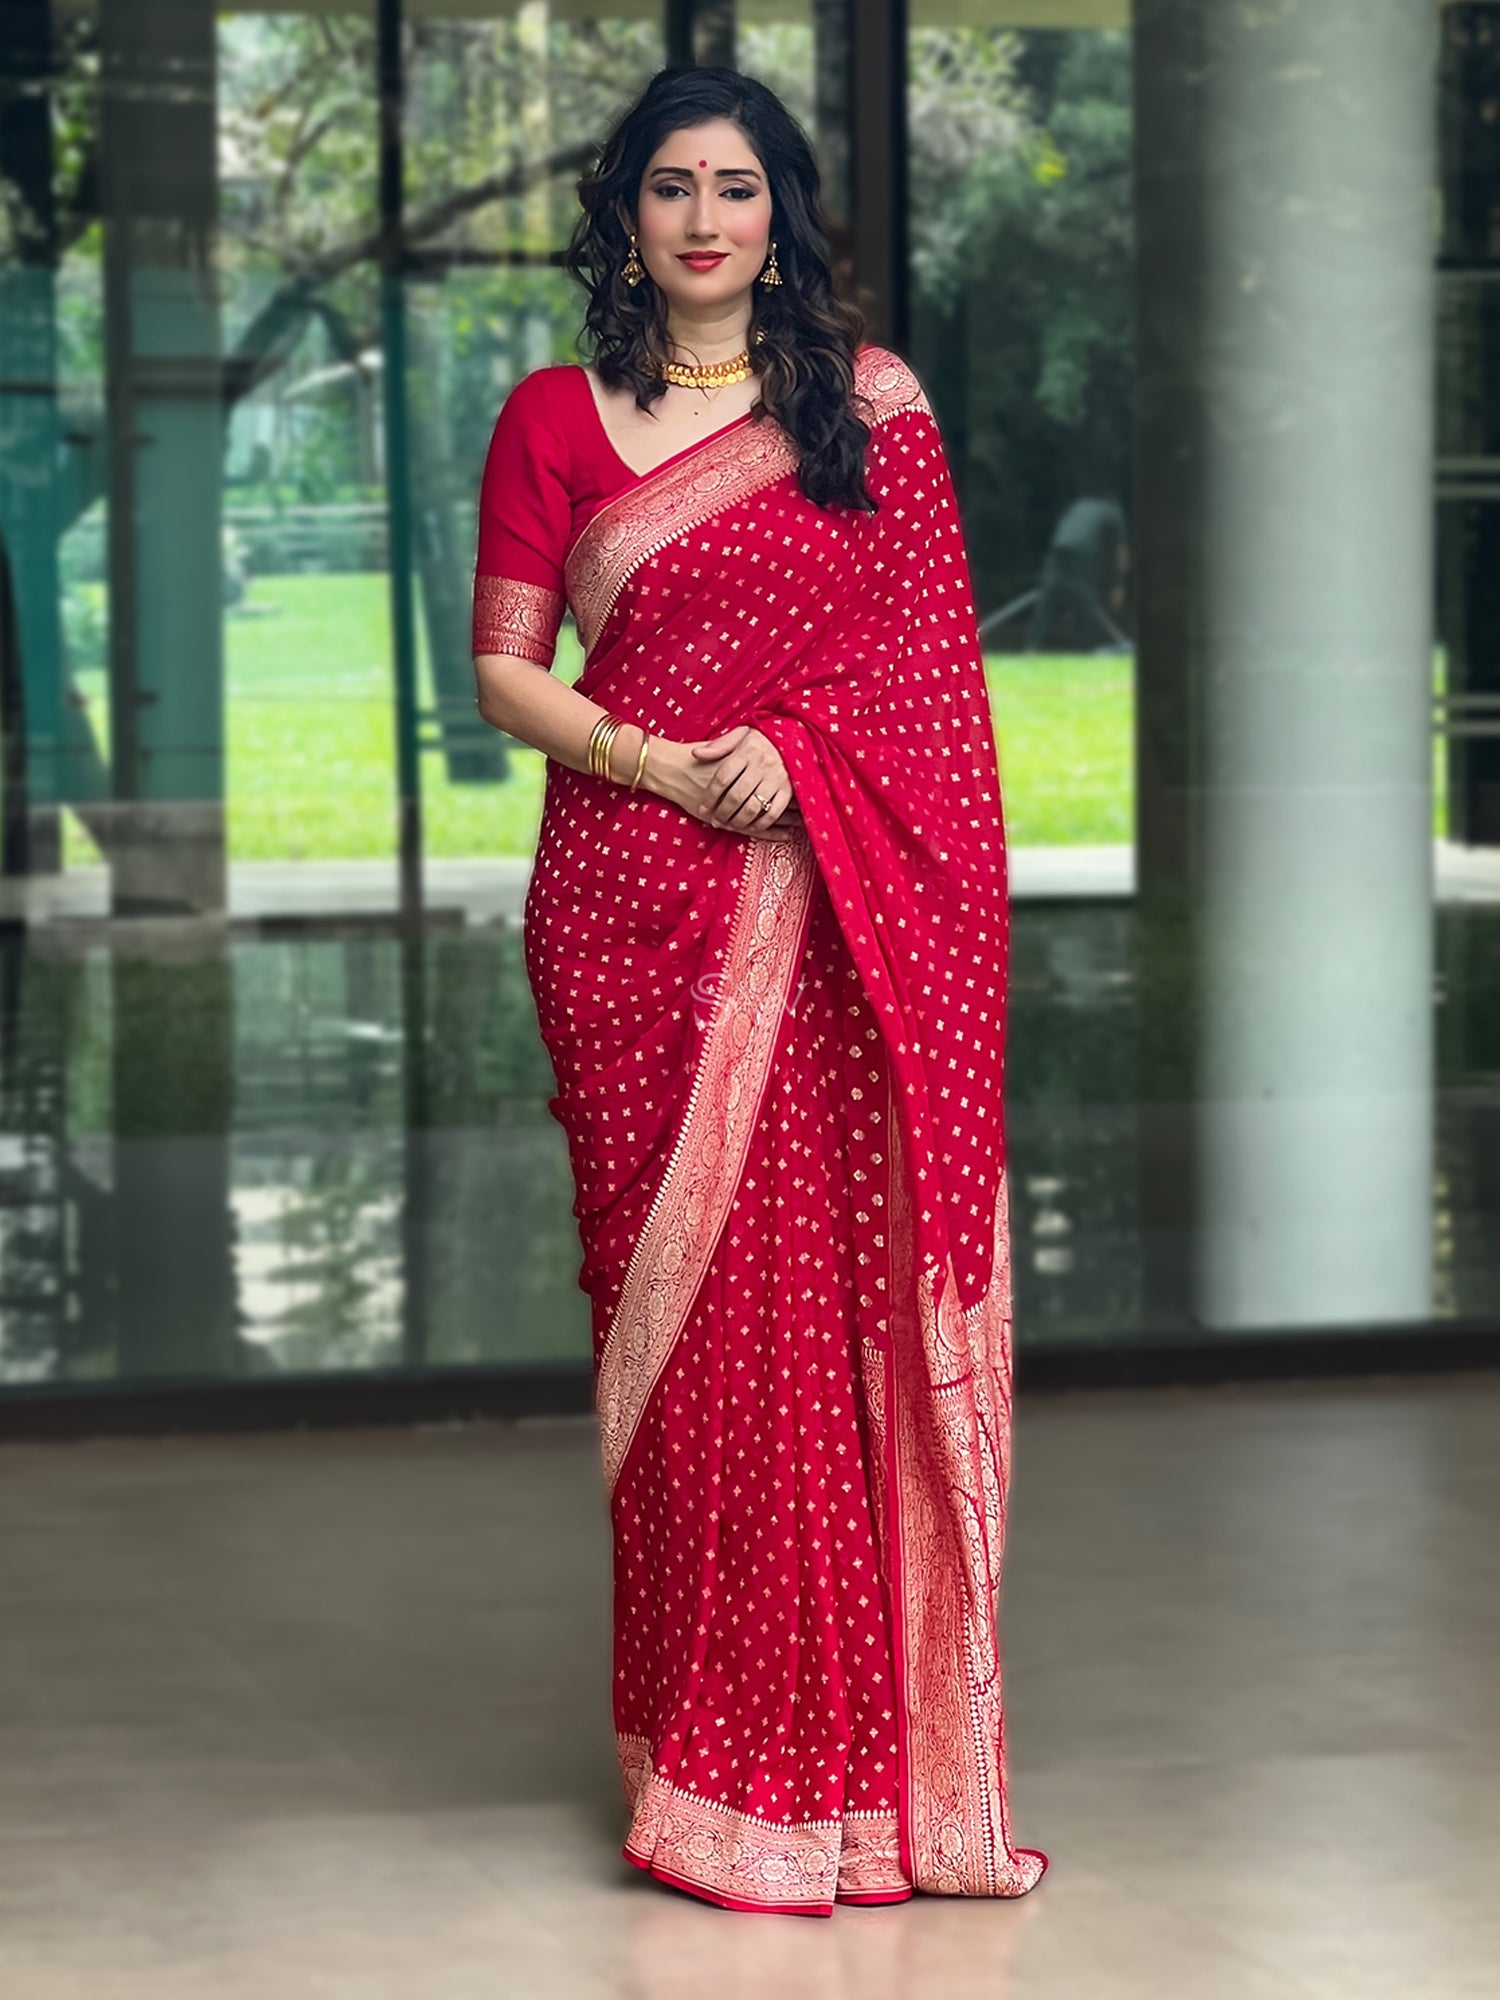 Top 5 Summer Sarees To Beat The Summer Heat In Grace! – The Loom Blog